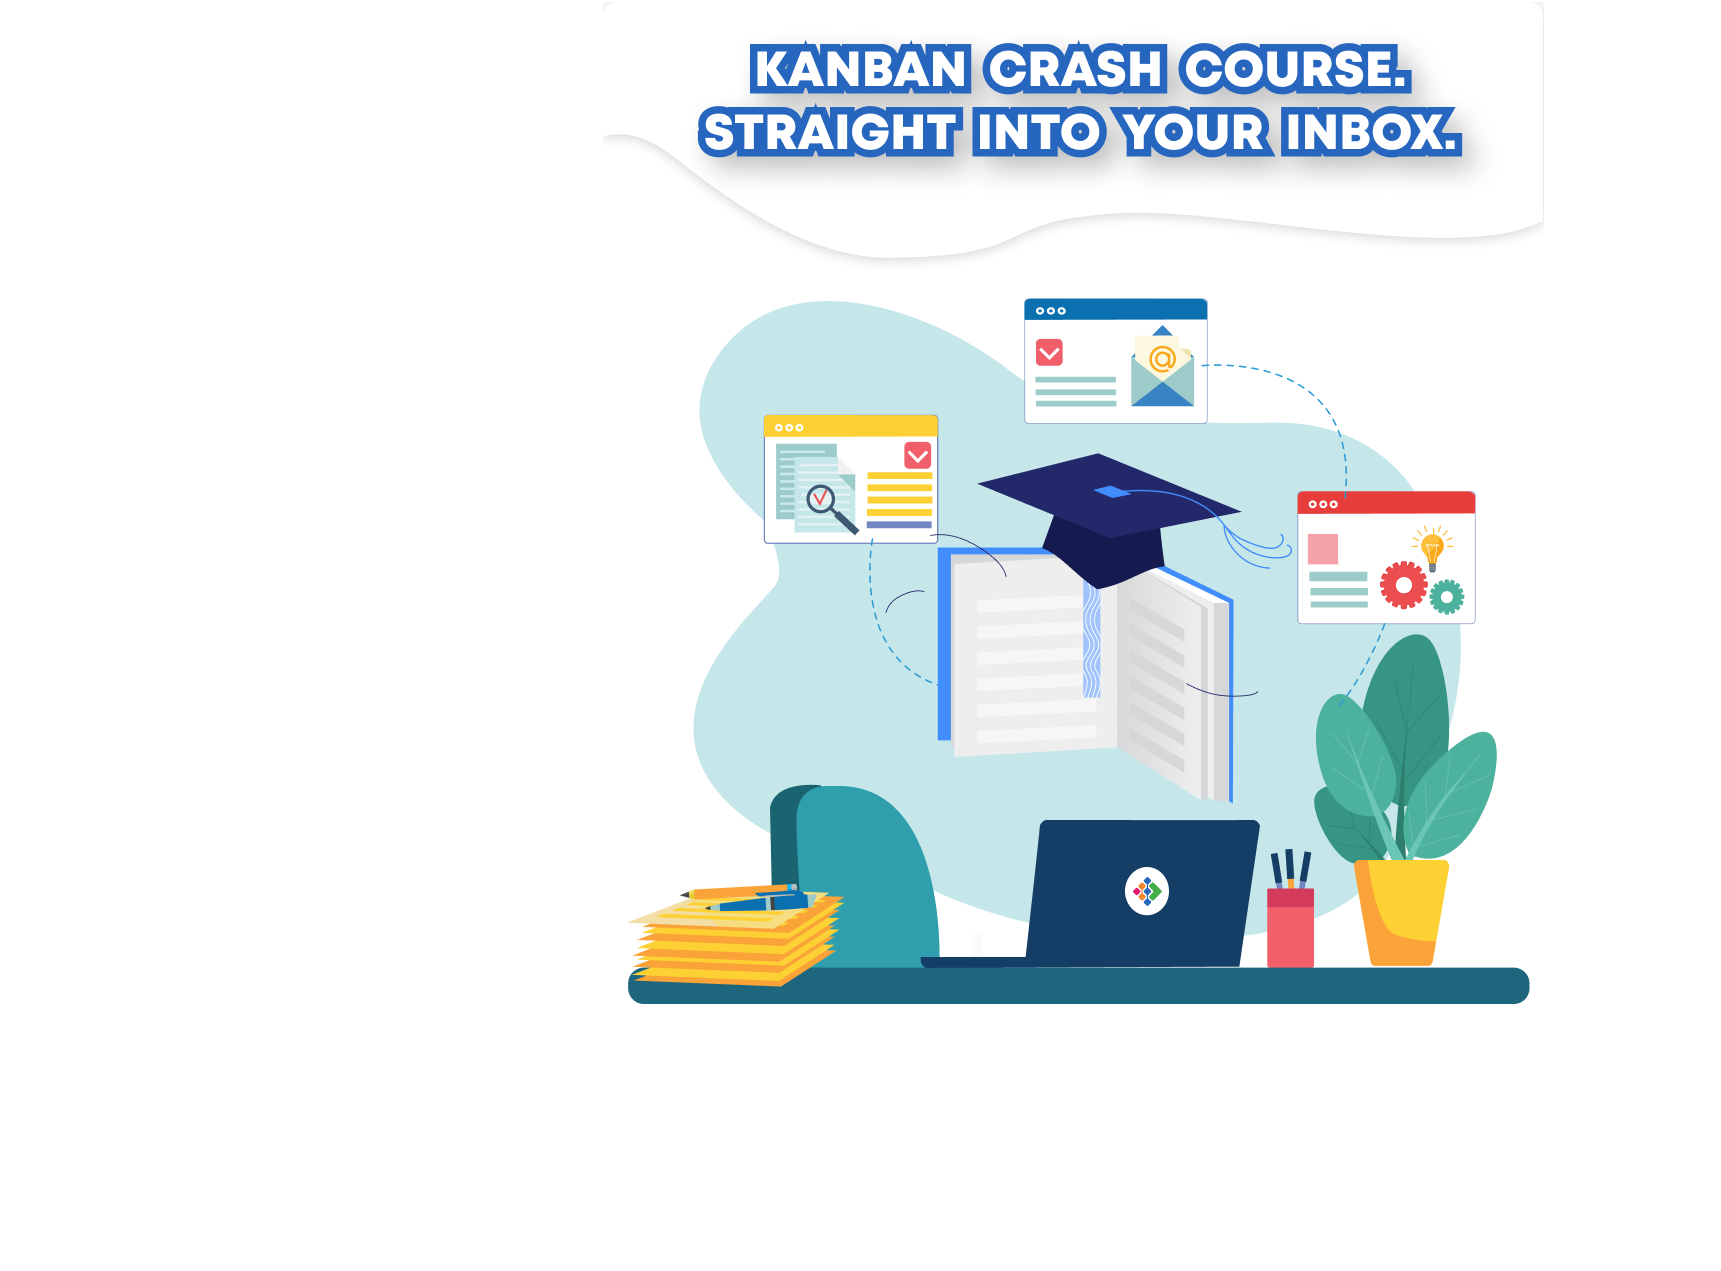 We Will Teach You Kanban in 7 Days. Learn the Basics. For Free.